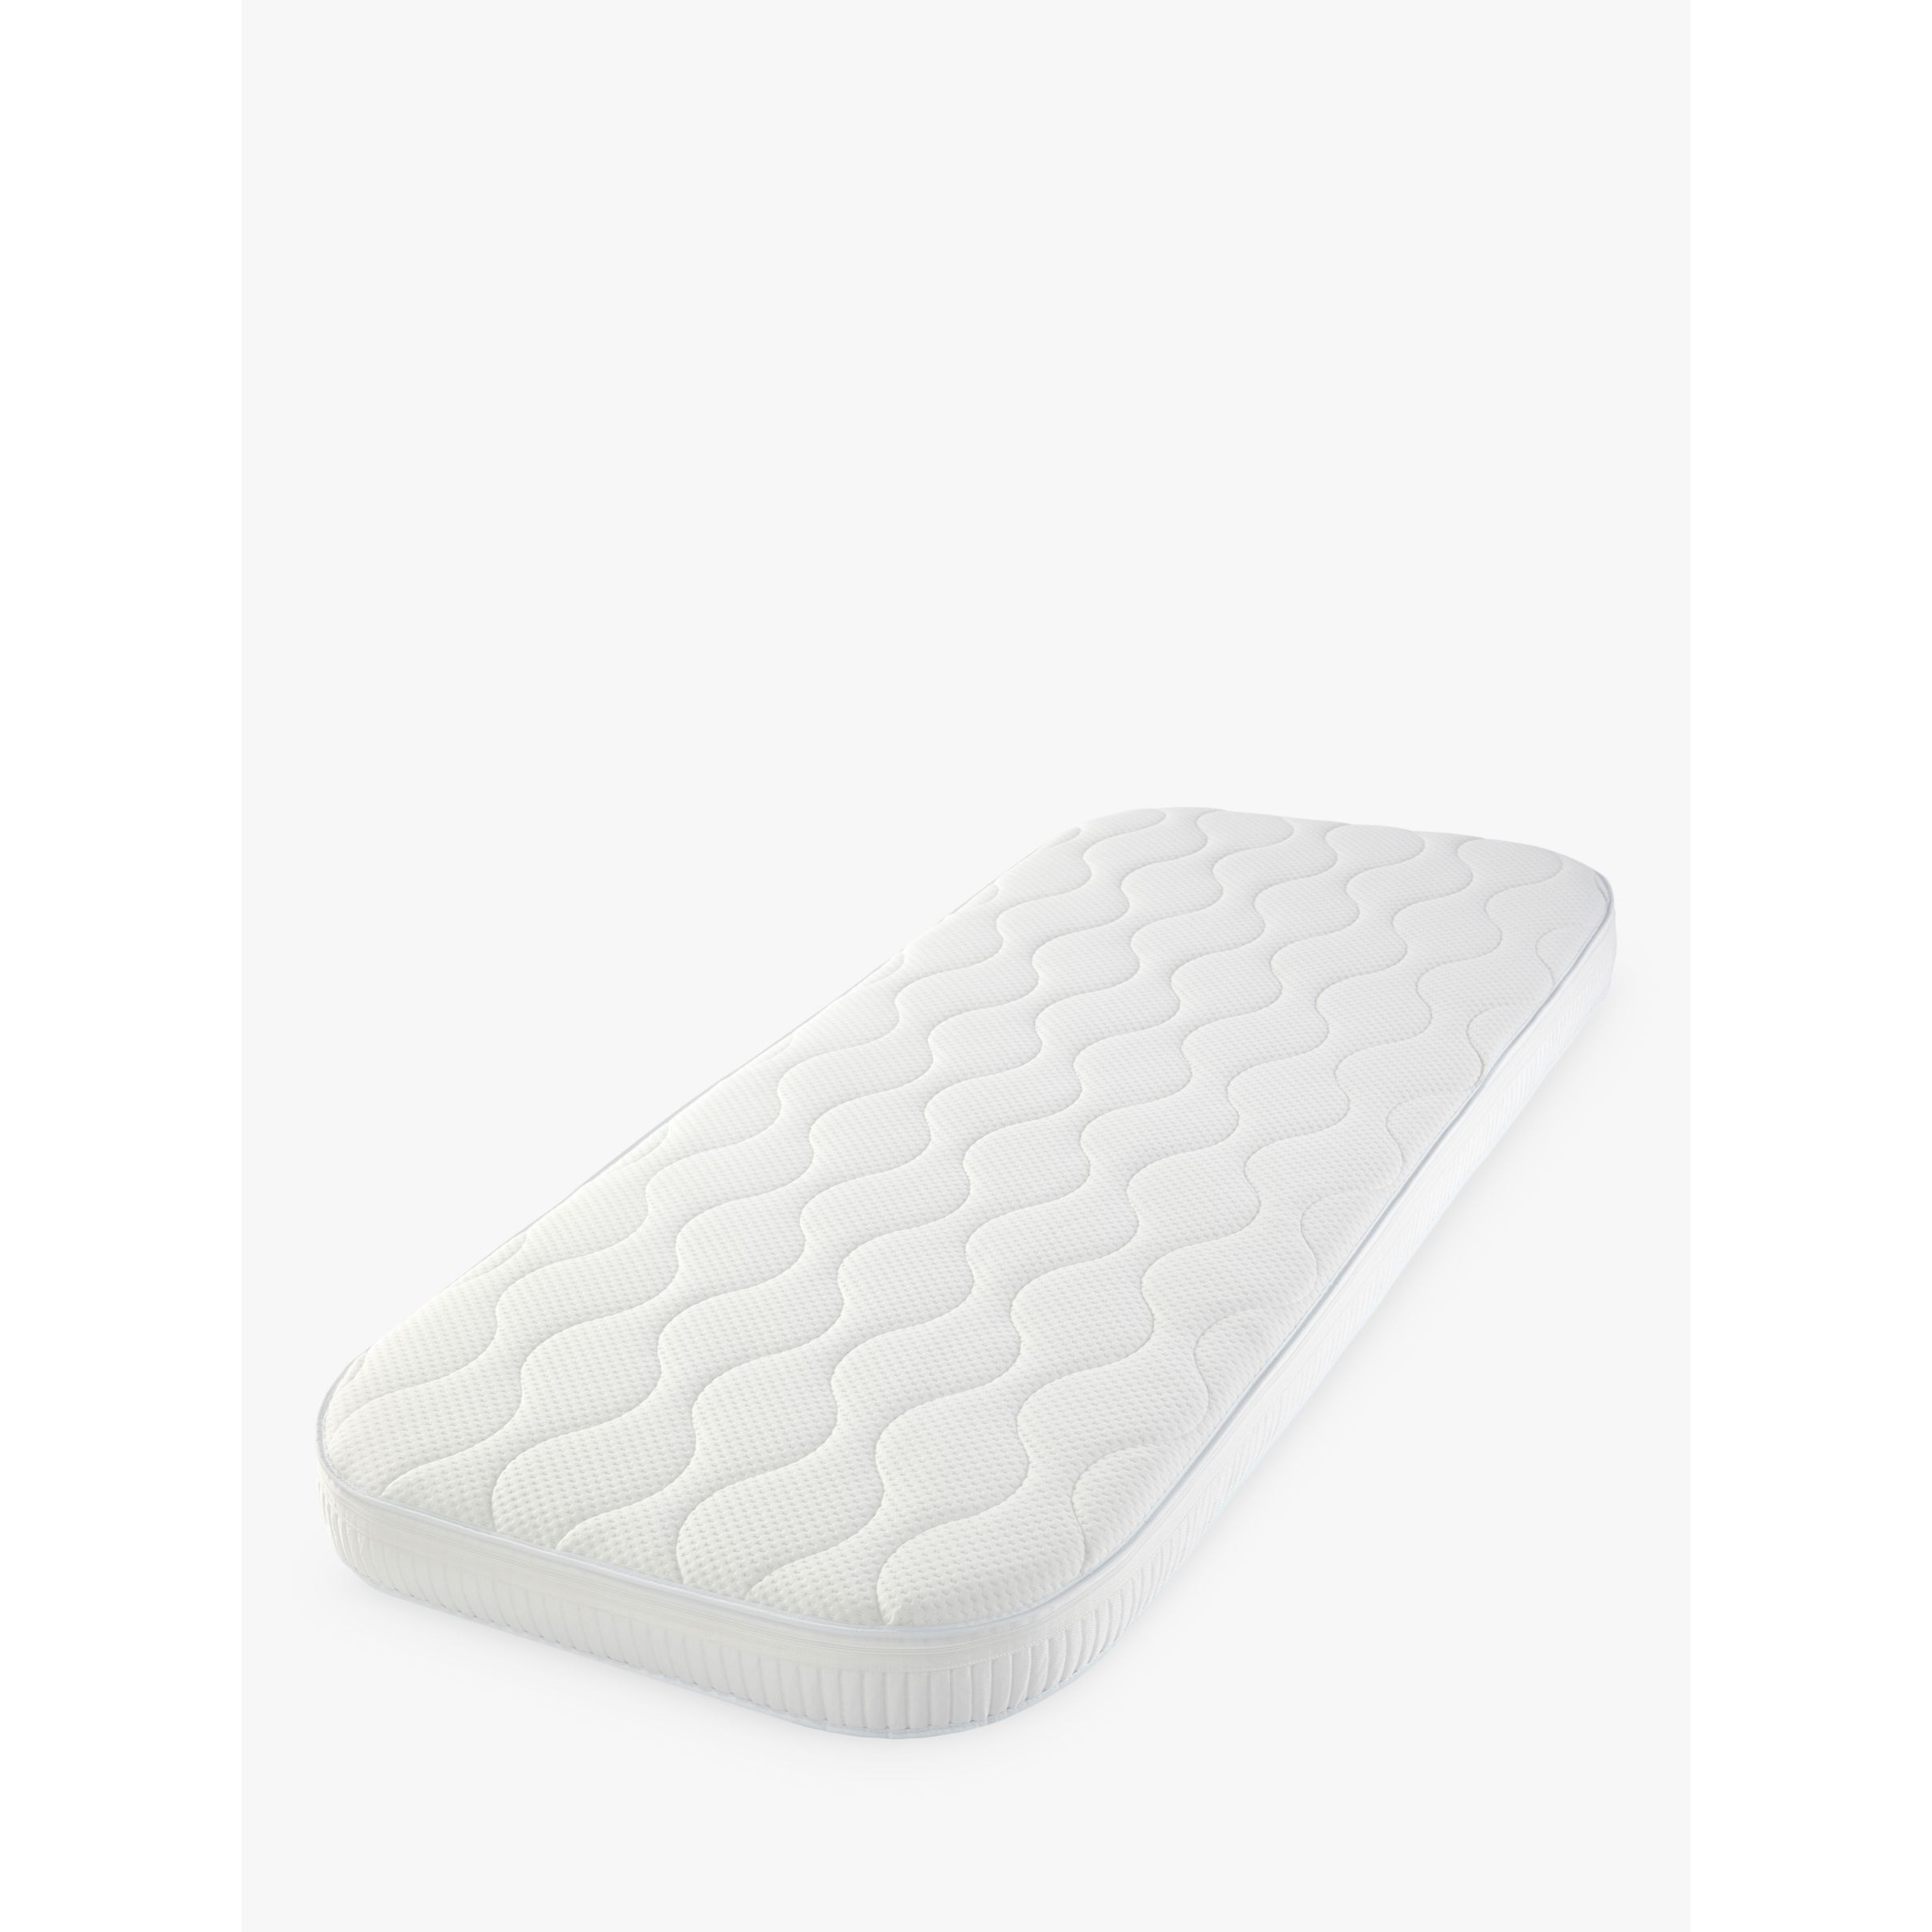 Gaia Baby Serena Pocket Spring Mattress for Complete Sleep Cot, 136 x 66cm - image 1